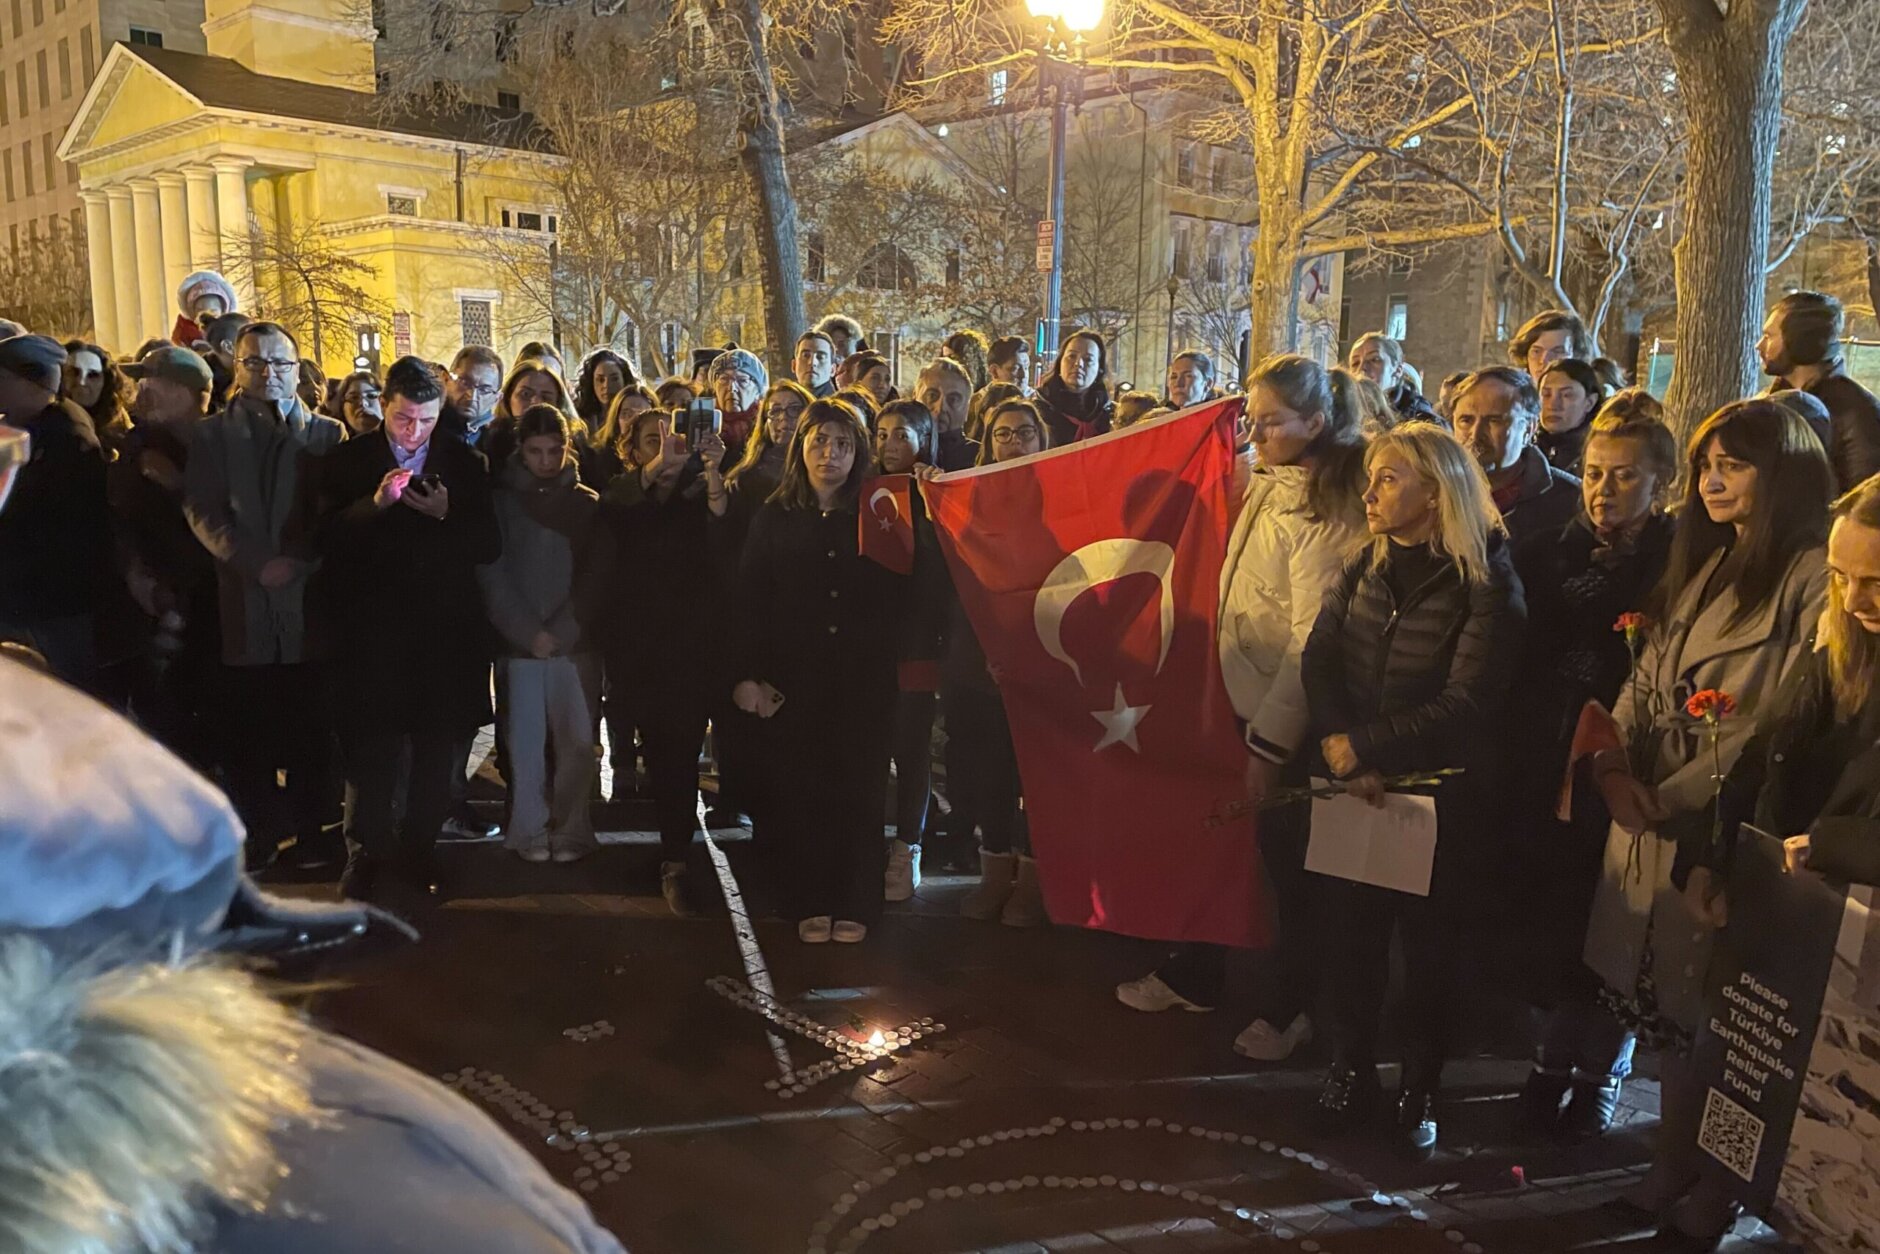 The victims of the deadly earthquake that has left tens of thousands dead in Turkey and Syria were remembered in D.C. with a vigil at Lafayette Square.